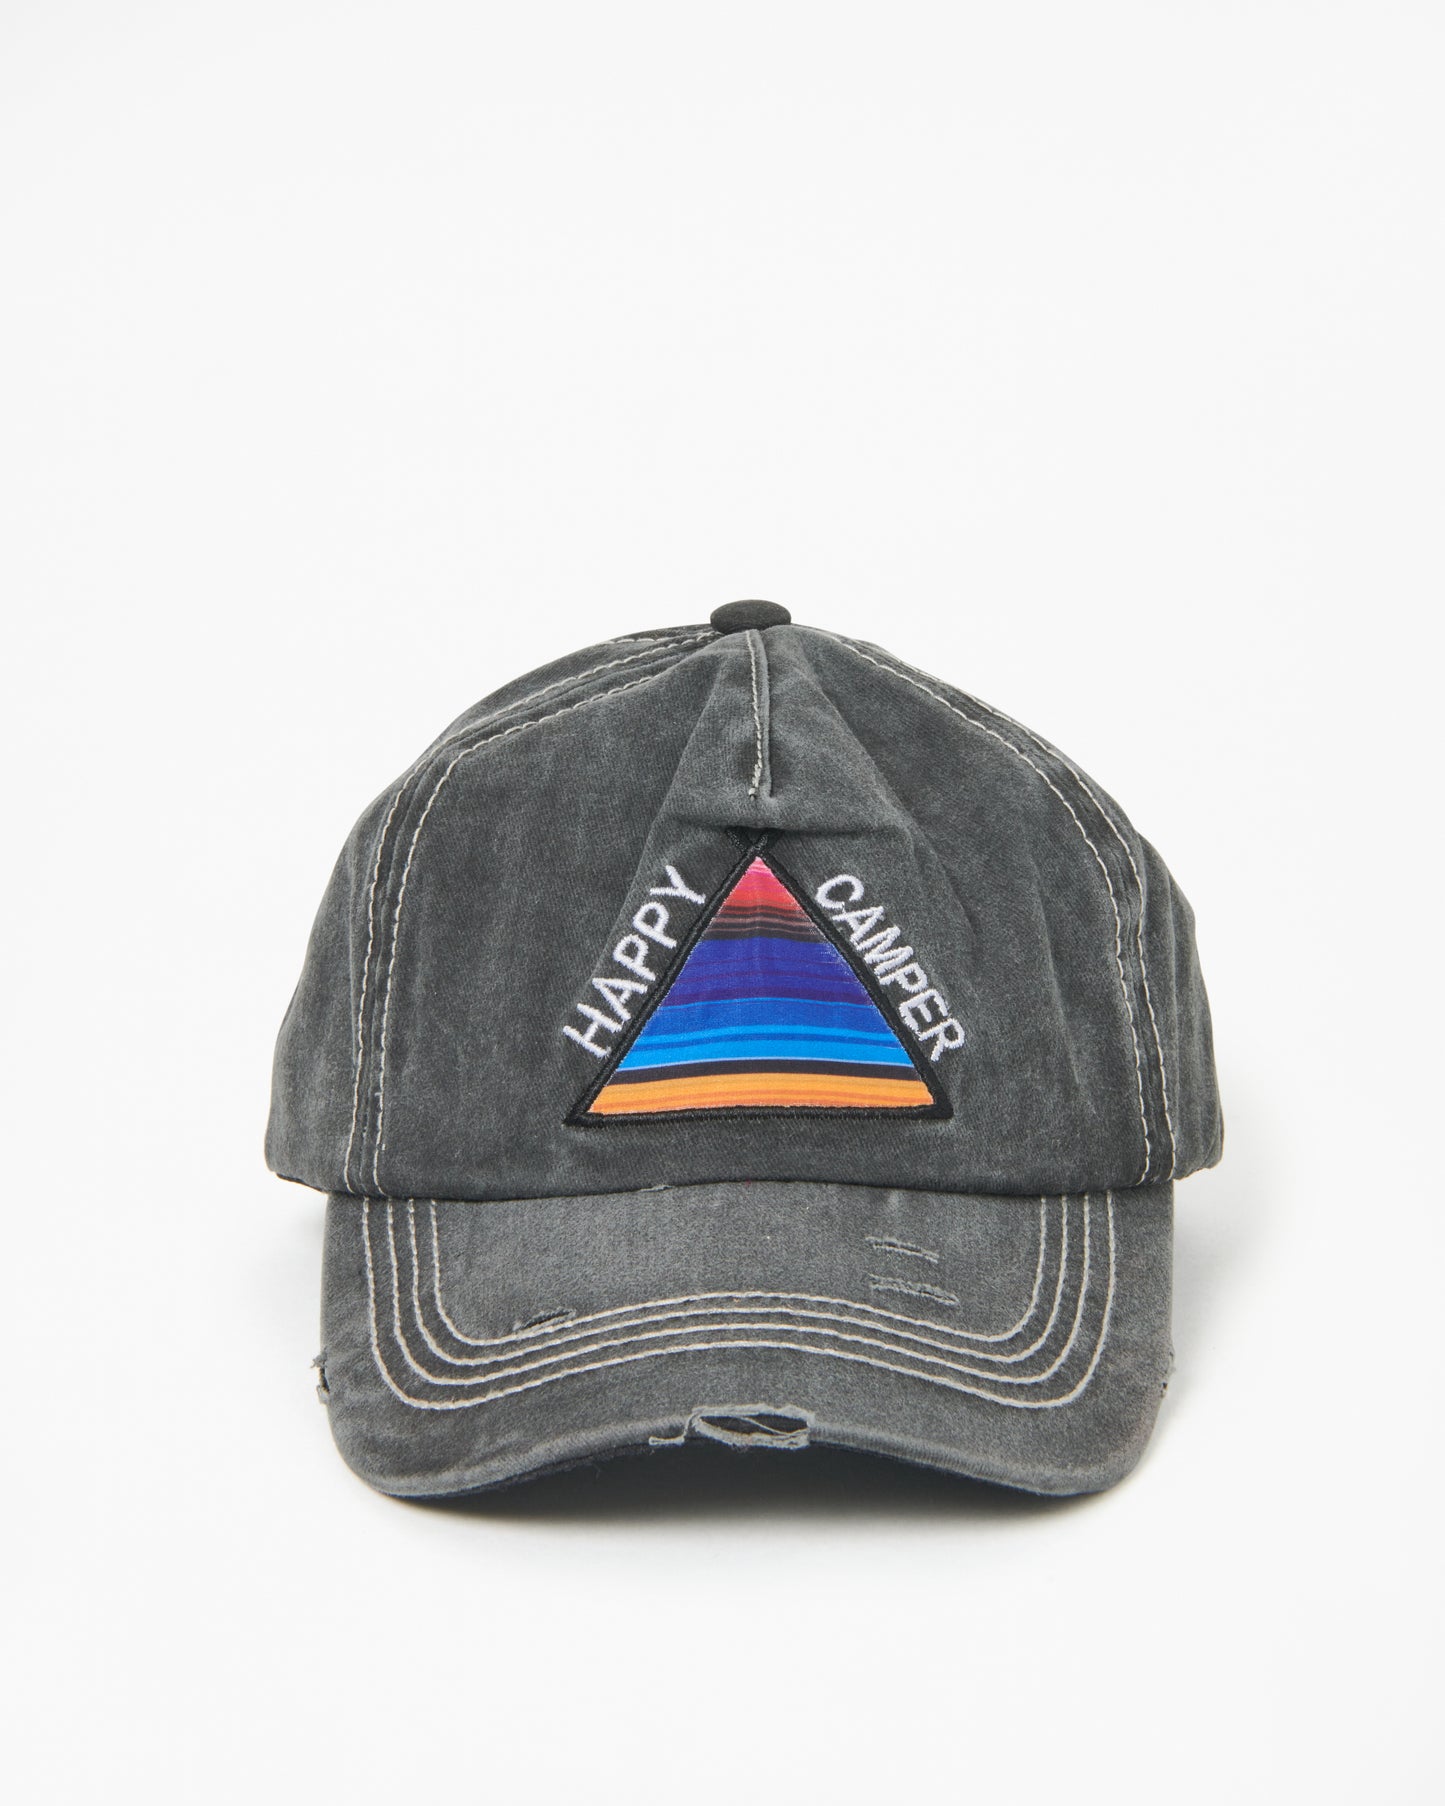 Distressed Baseball Caps with Patches